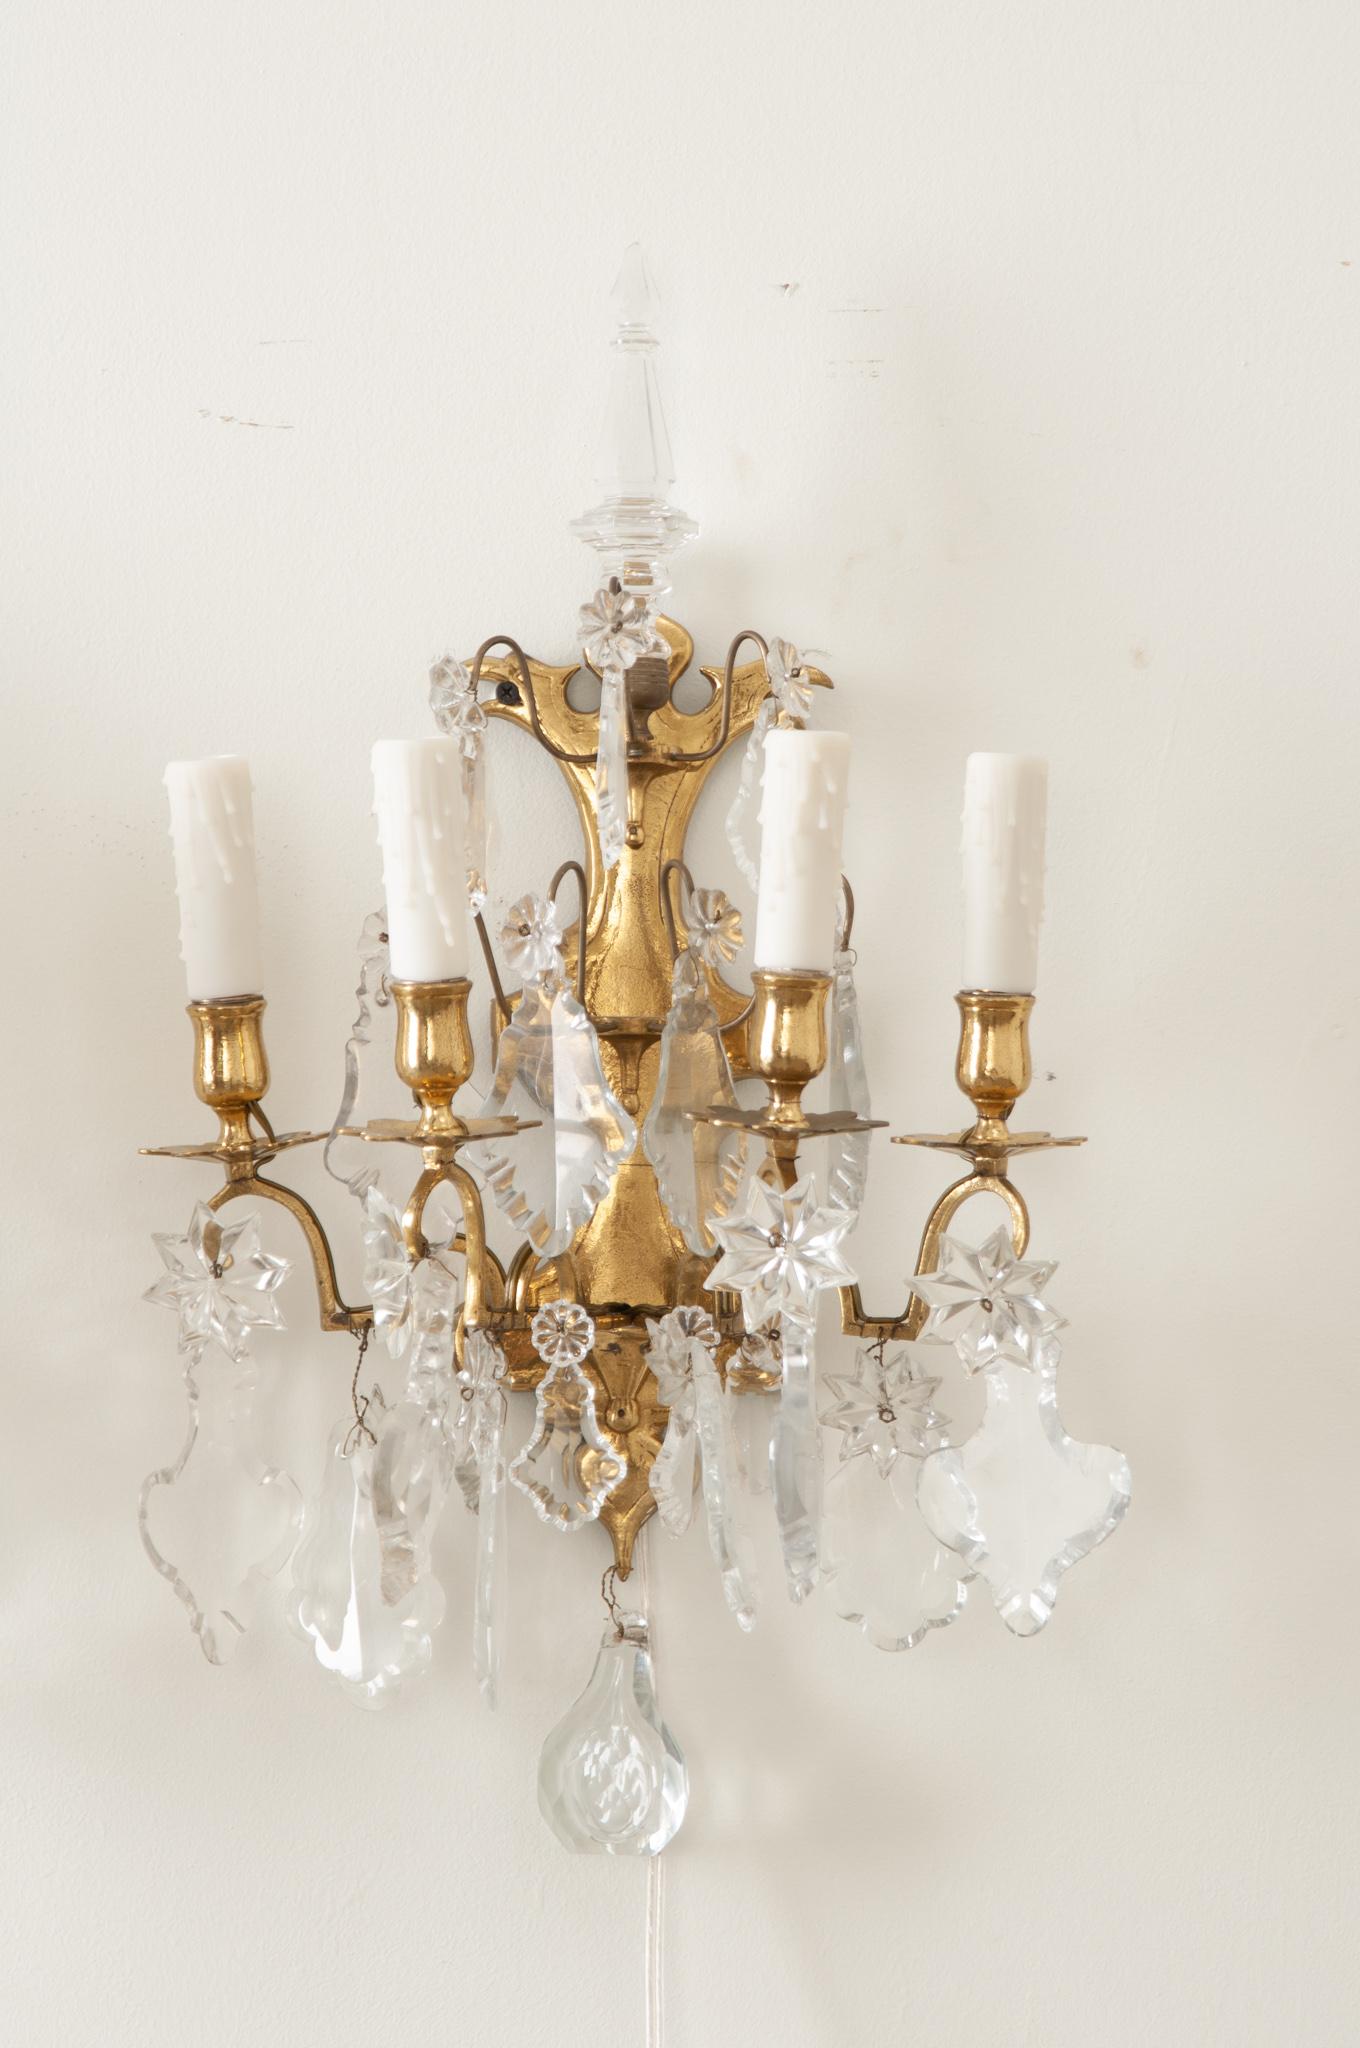 An elegant pair of brass and crystal French wall sconces. Each sconce has four brass arms with cut crystals all ending on a vertical cut brass backplate. The pair have been cleaned and wired for US electrical using UL certified parts. The backplates